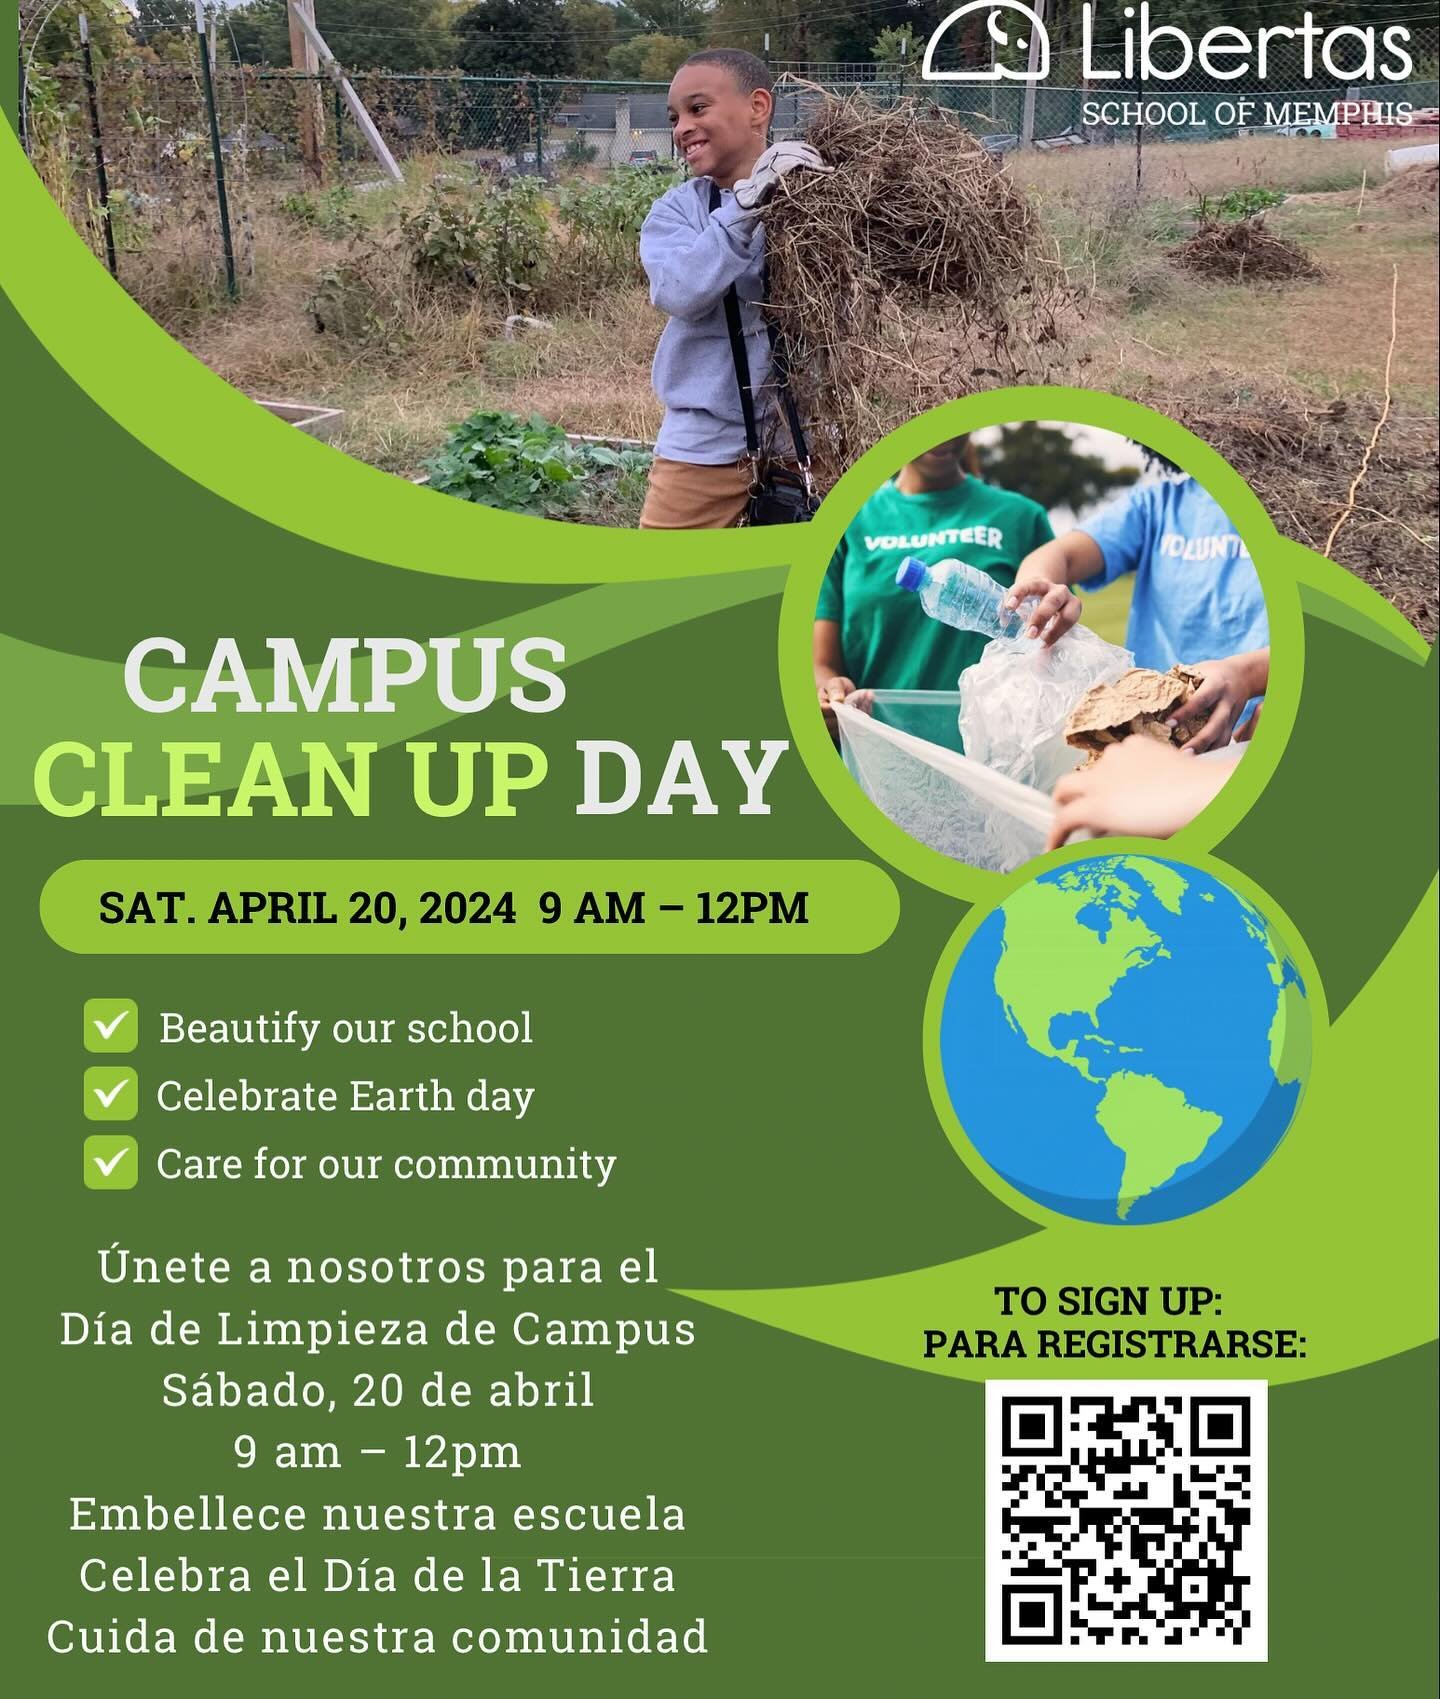 Join us for our Campus Clean-up on Saturday, April 20th, from 9:00 a.m. to 12 p.m. Help us beautify our school and care for our community while we celebrate Earth Day. #ChooseLibertas #EarthDay